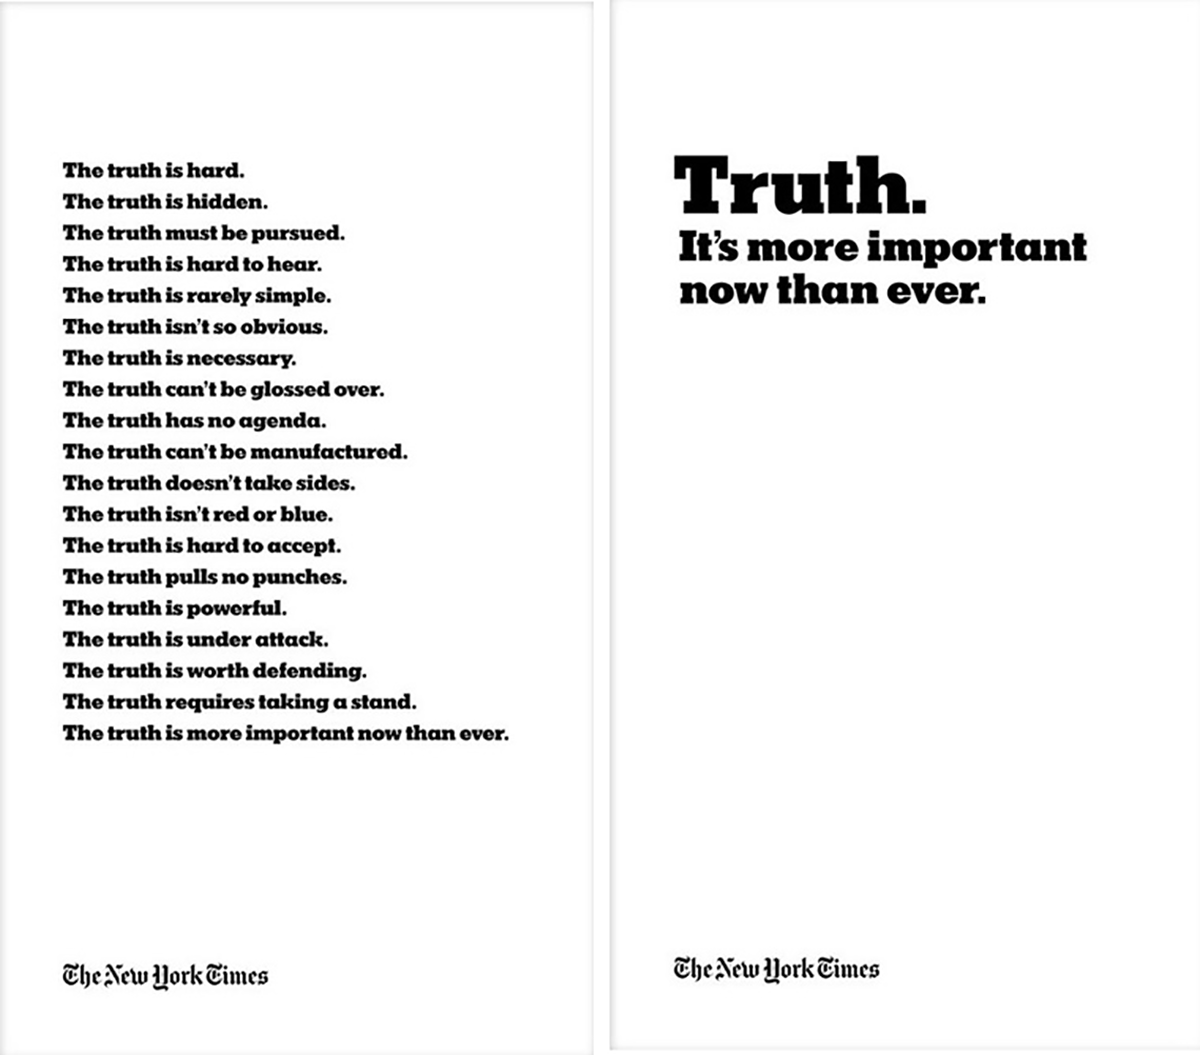 The New York Times "Truth is hard" magazine campaign